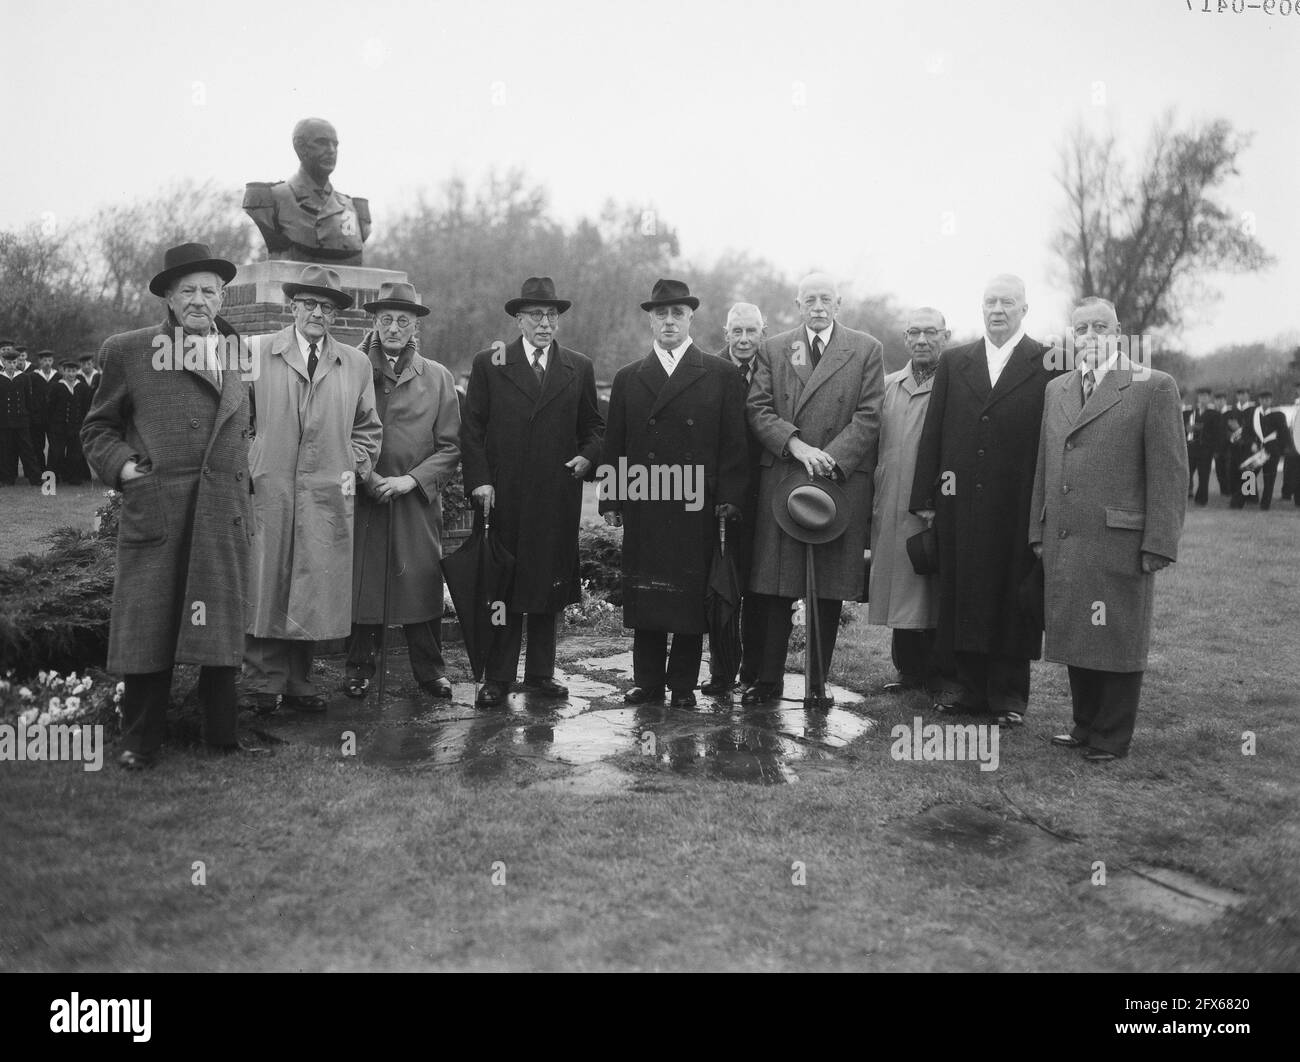 Commemoration 50th anniversary KNvVL at Valkenburg. From left to right: M. van Meel, R. J. Castendijk, Chr. A. C. Nell, H. .C. van Ede van der Pals,$, October 18, 1957, commemorations, The Netherlands, 20th century press agency photo, news to remember, documentary, historic photography 1945-1990, visual stories, human history of the Twentieth Century, capturing moments in time Stock Photo